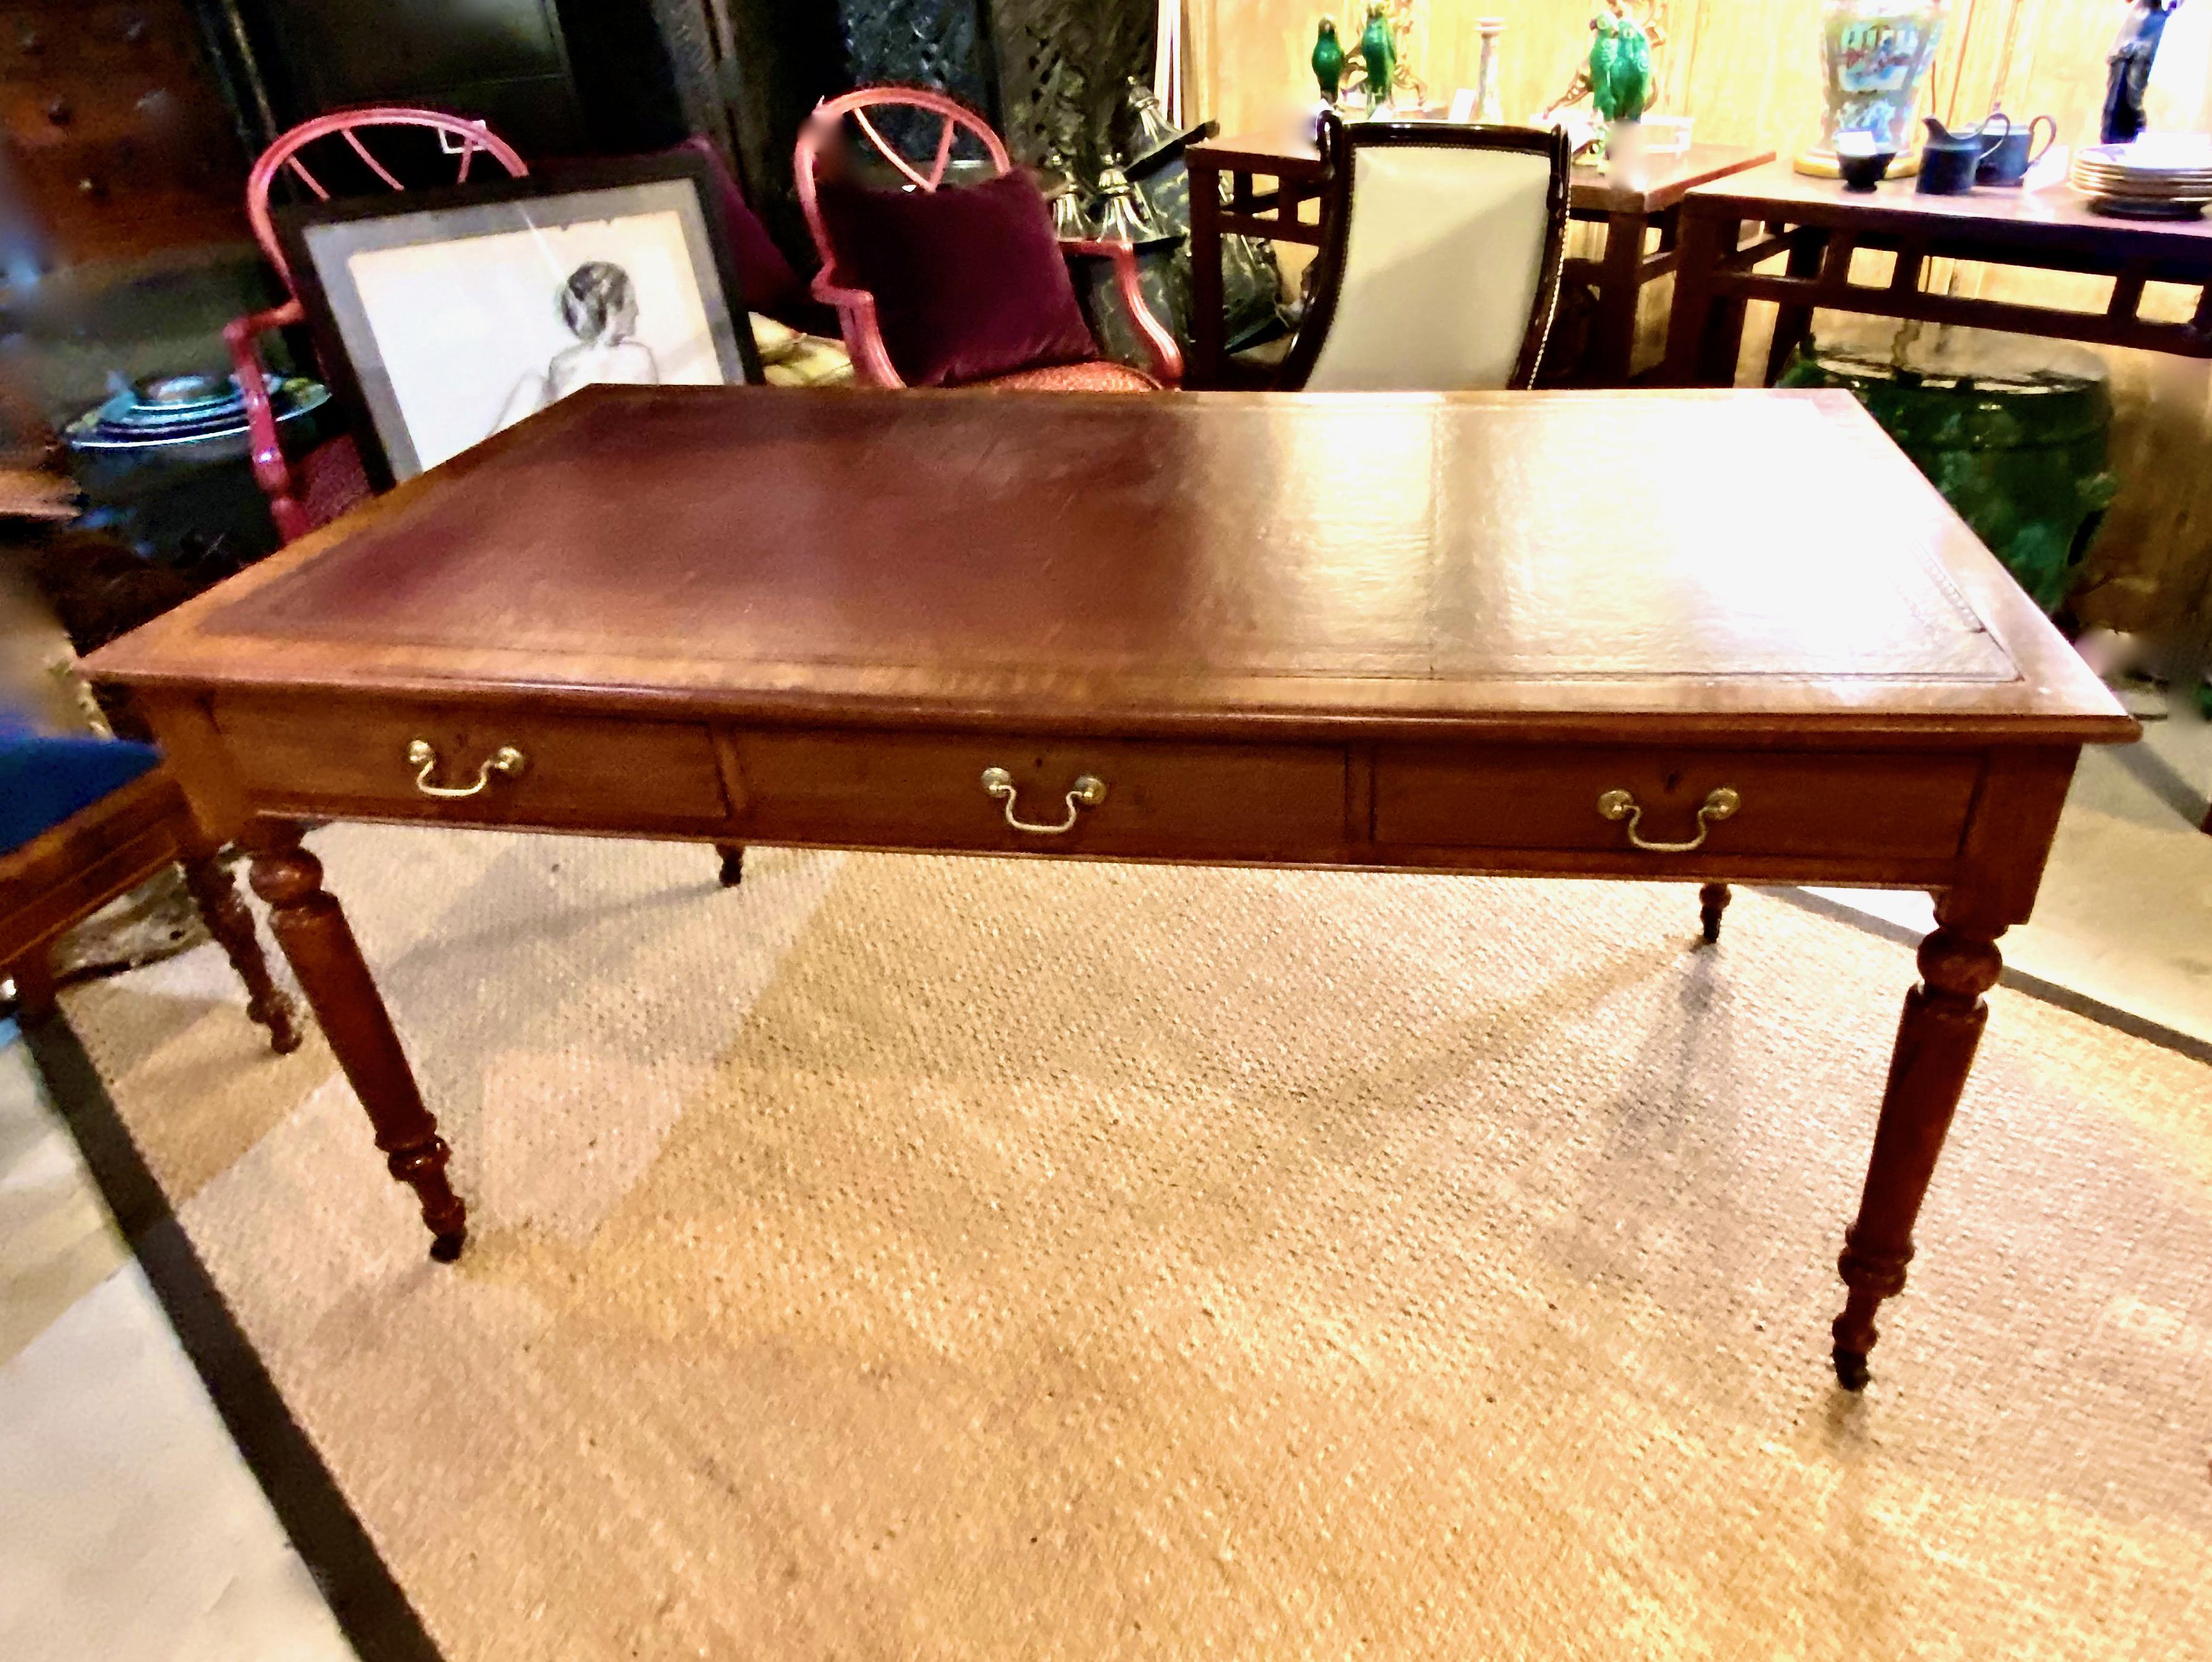 This is a classic English mahogany 3-drawer writing table. The table is in overall very good condition. Although the drawer brasses are replacements, all other elements of the writing table appear to be original. The rich rust-colored leather